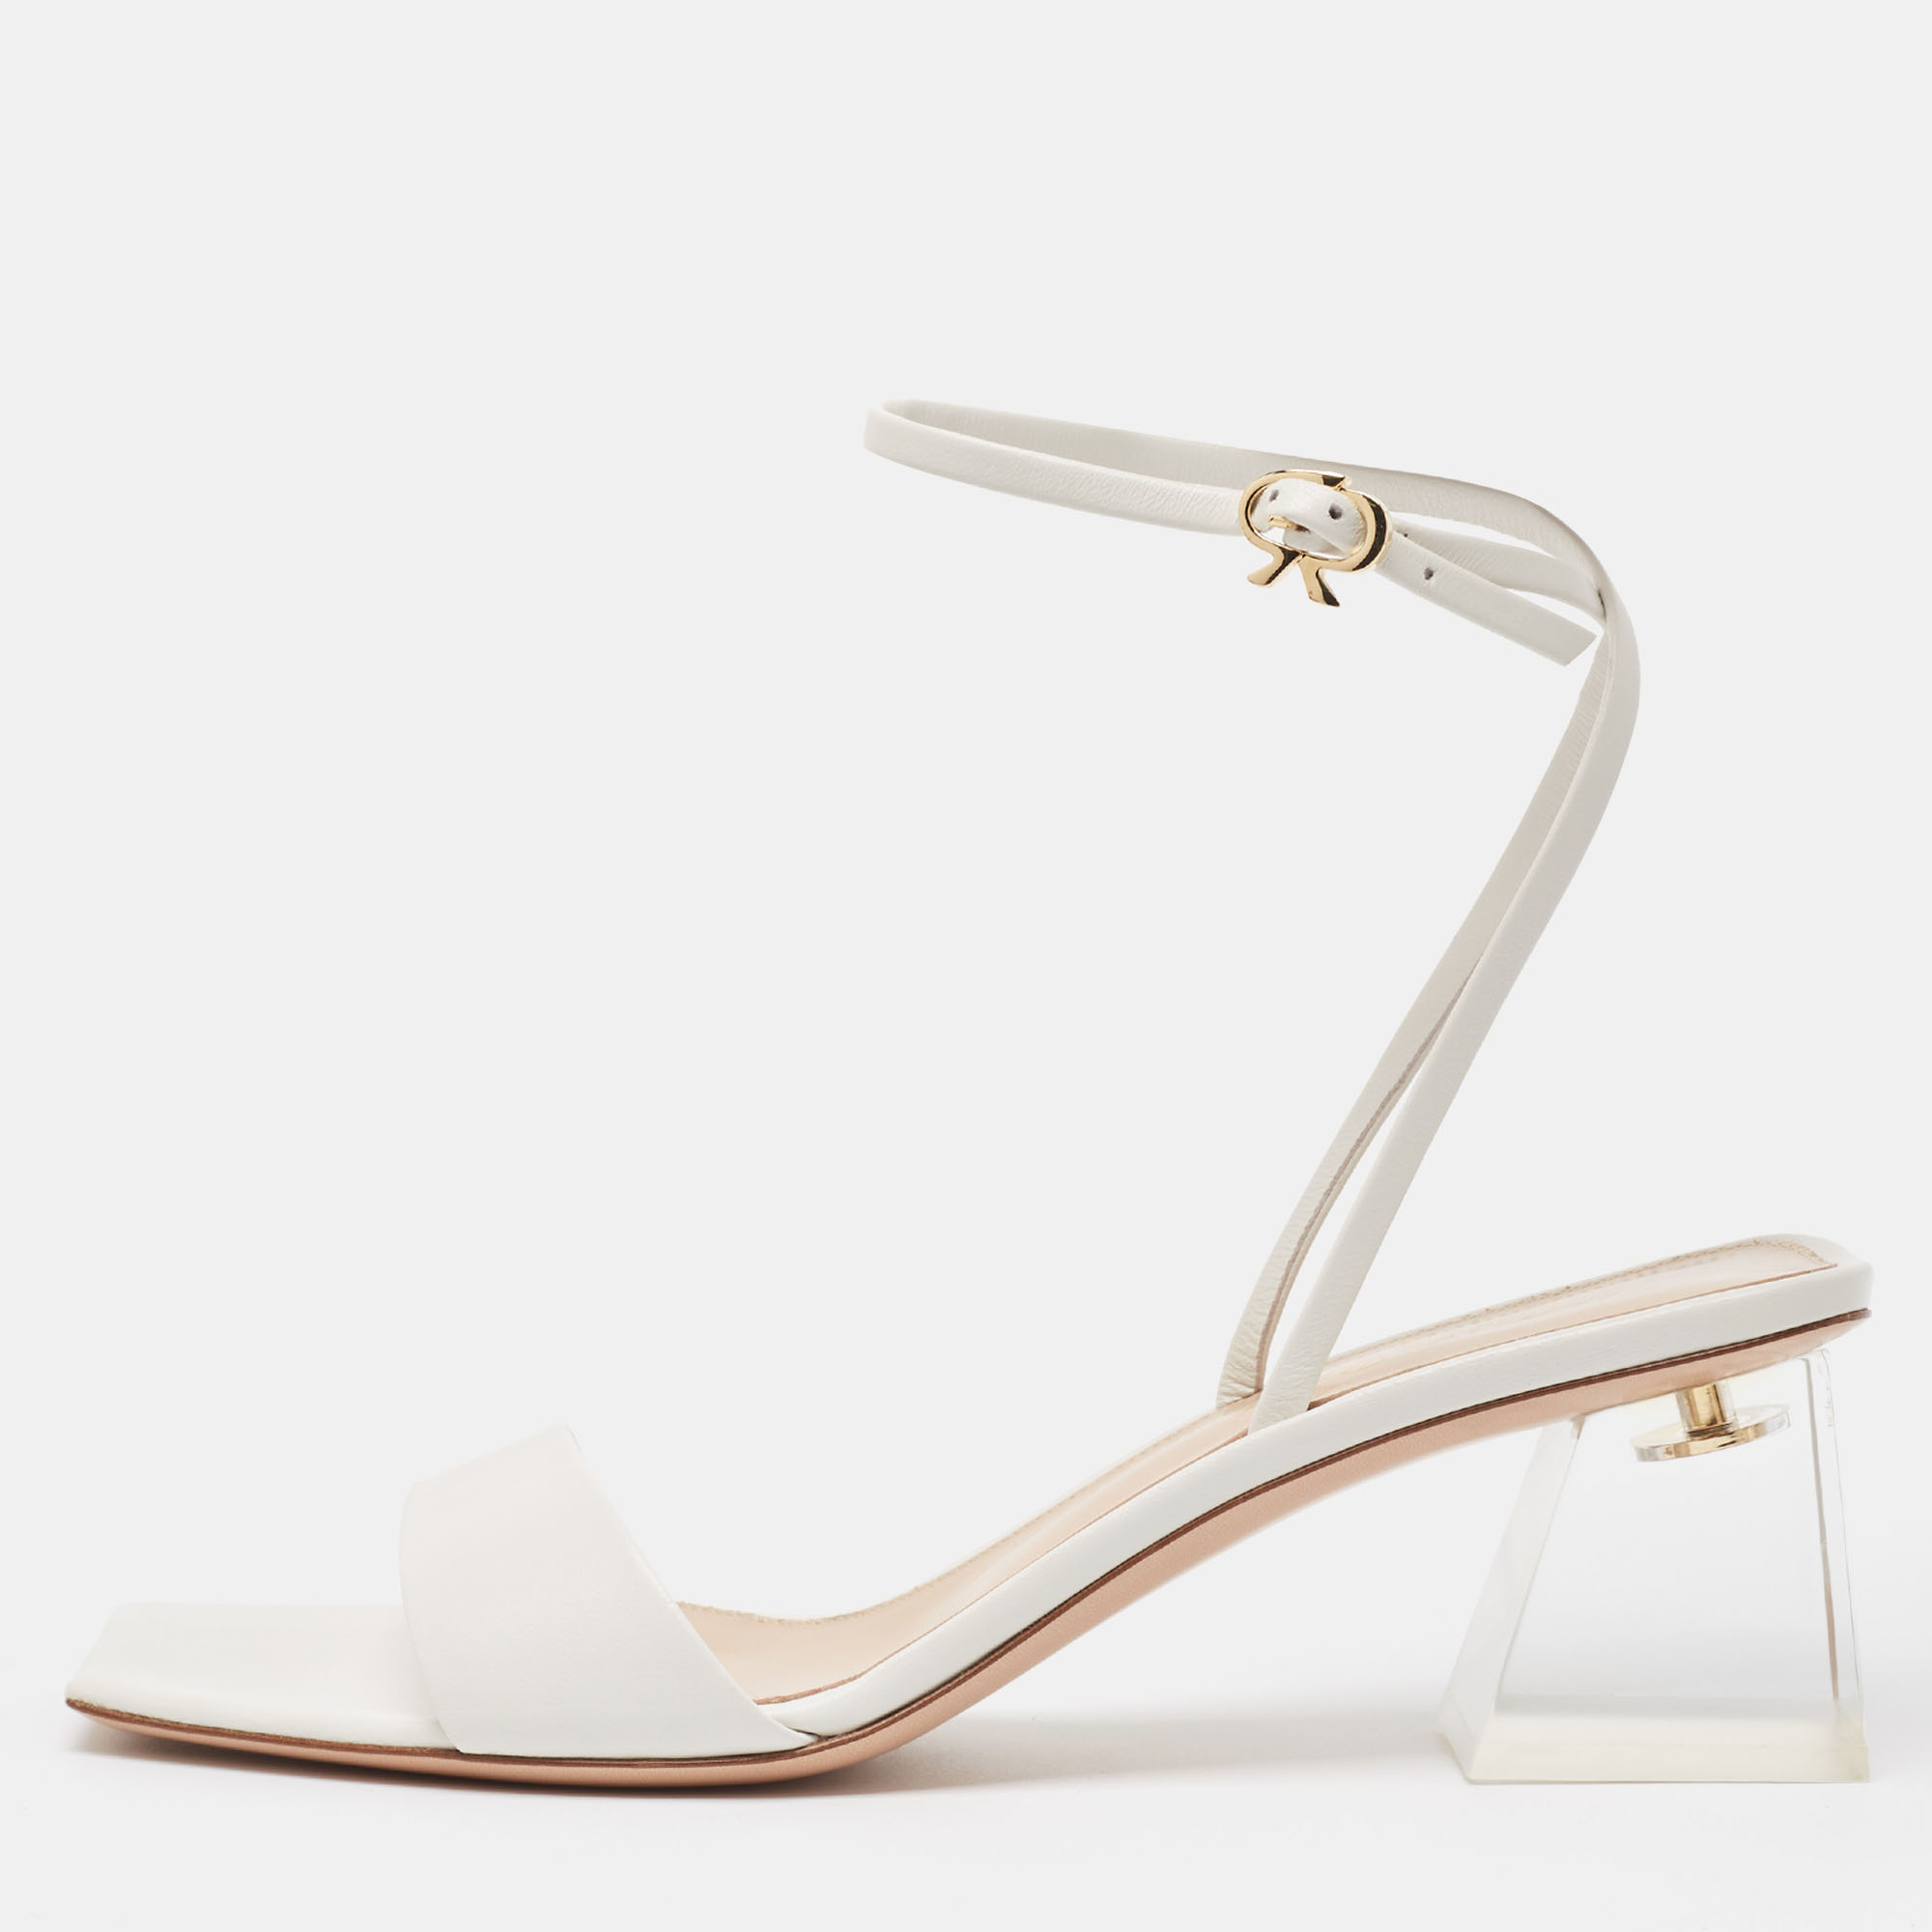 Gianvito rossi white leather cosmic sandals size 39.5